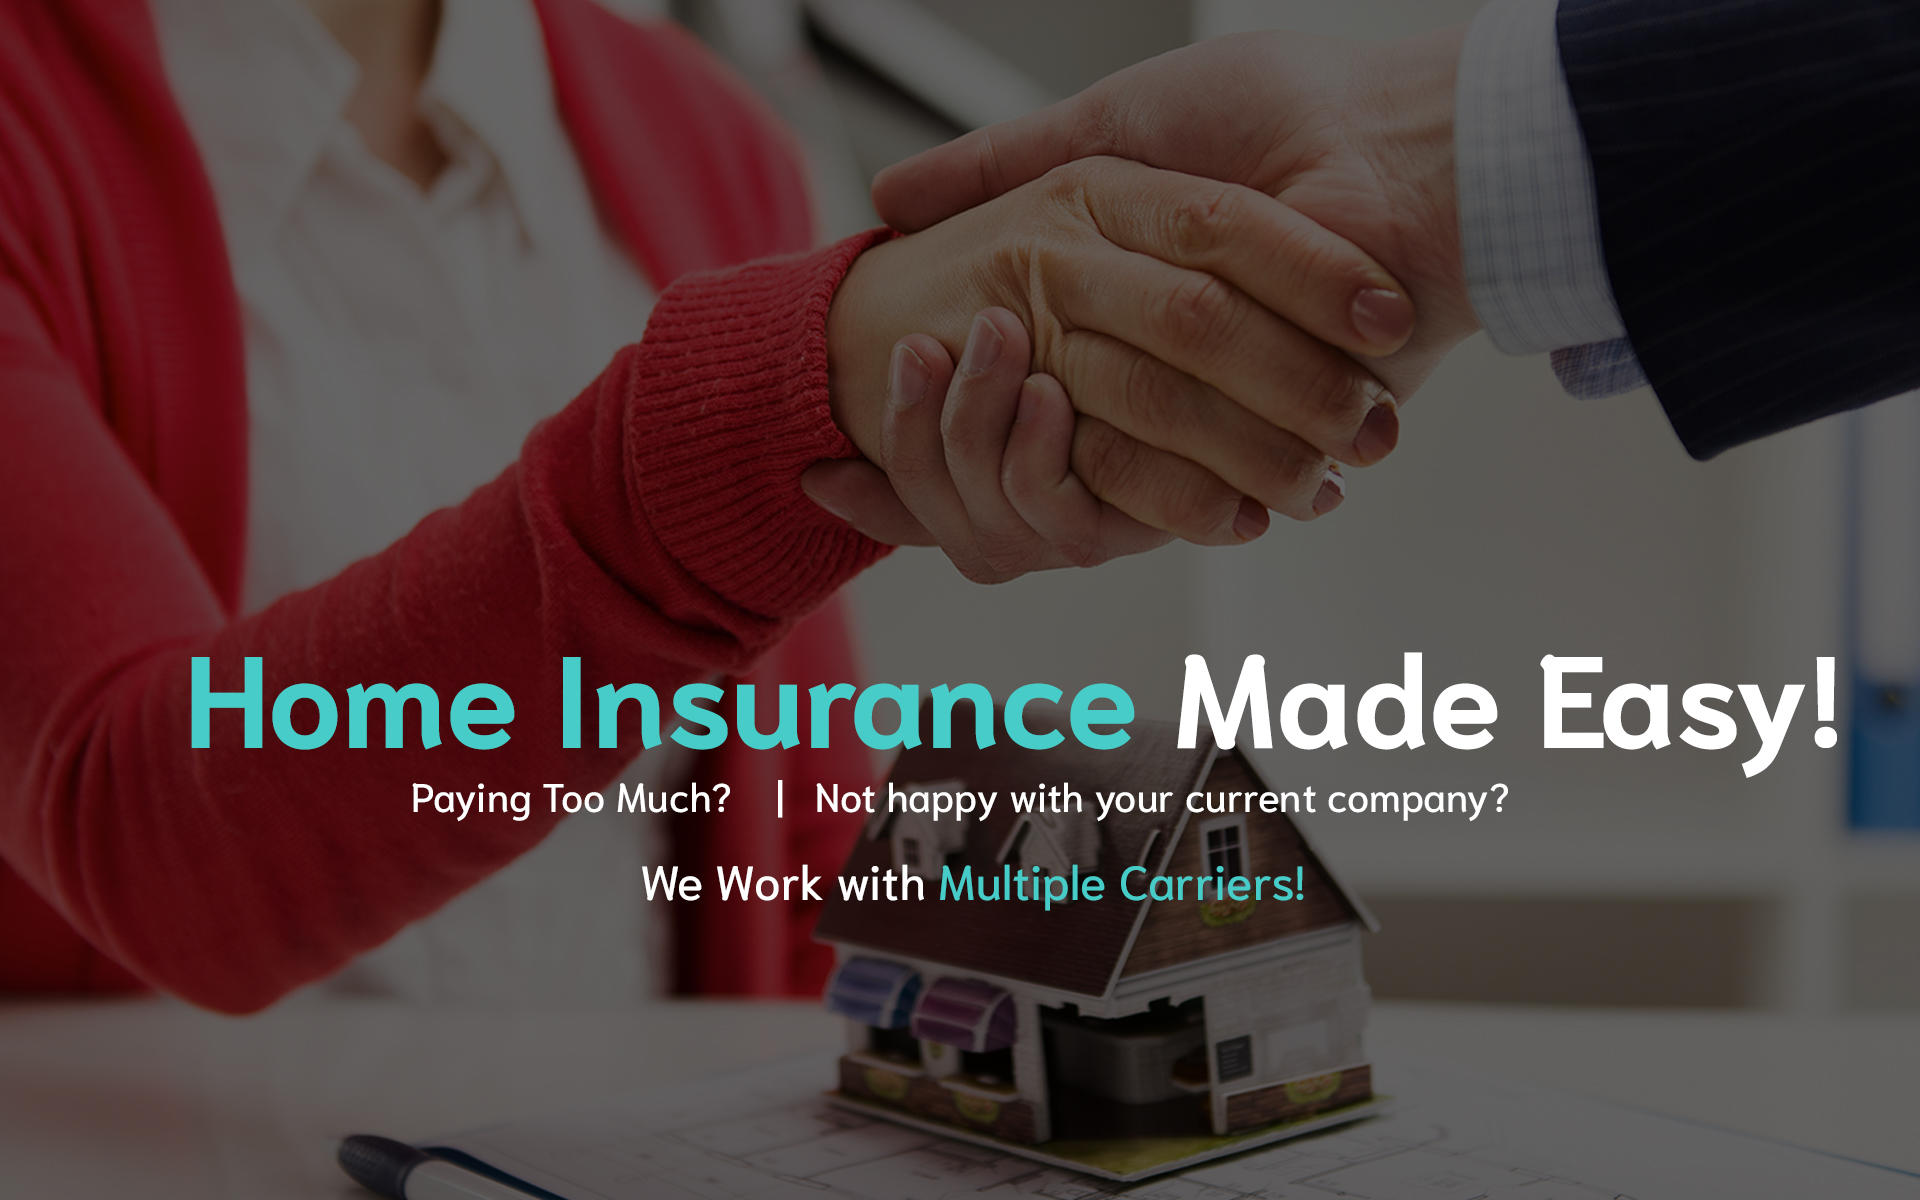 Just Us Insurance Services, Inc.